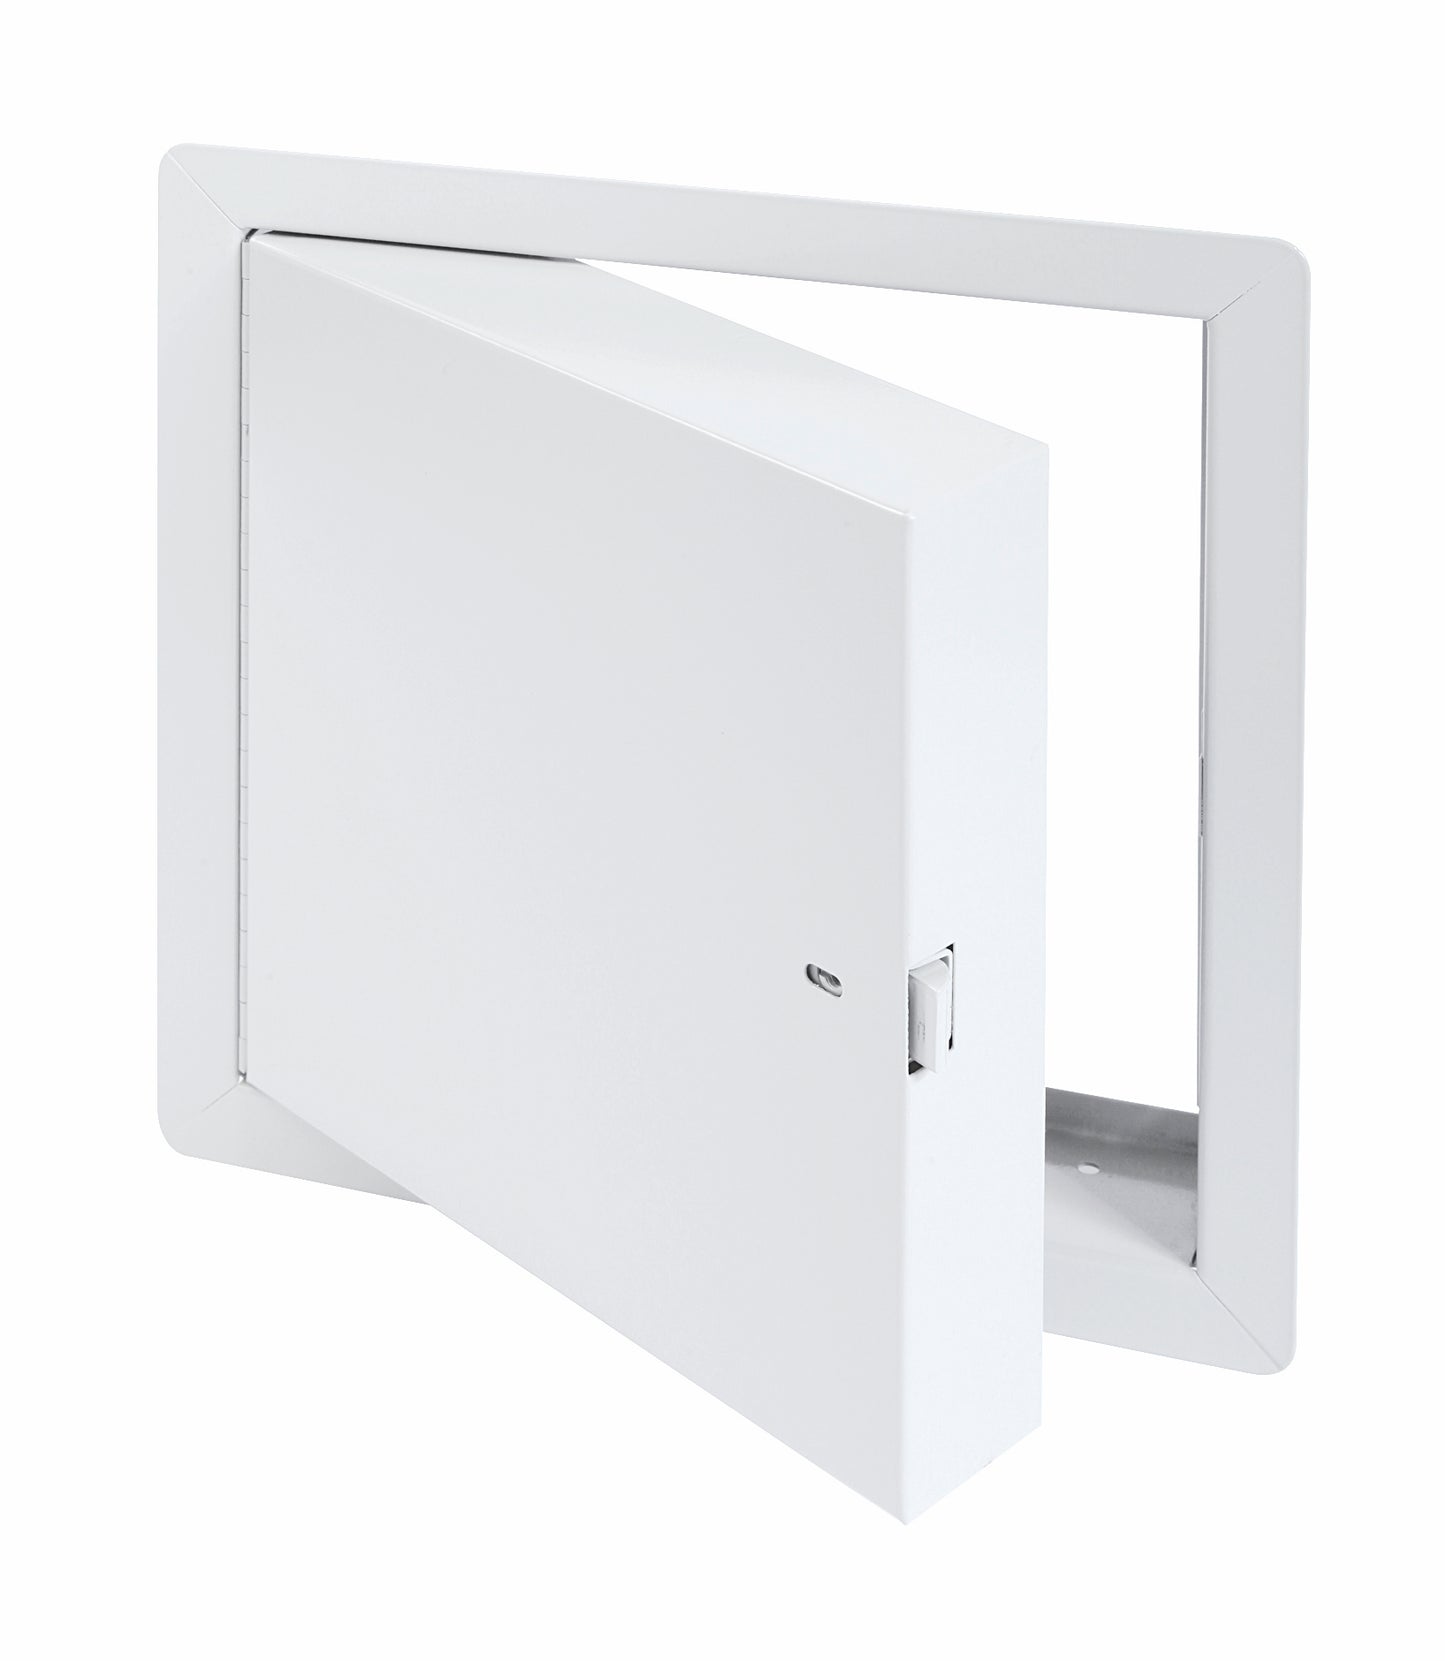 30"x30" Fire-rated Insulated Access Door with Exposed Flange, Cendrex